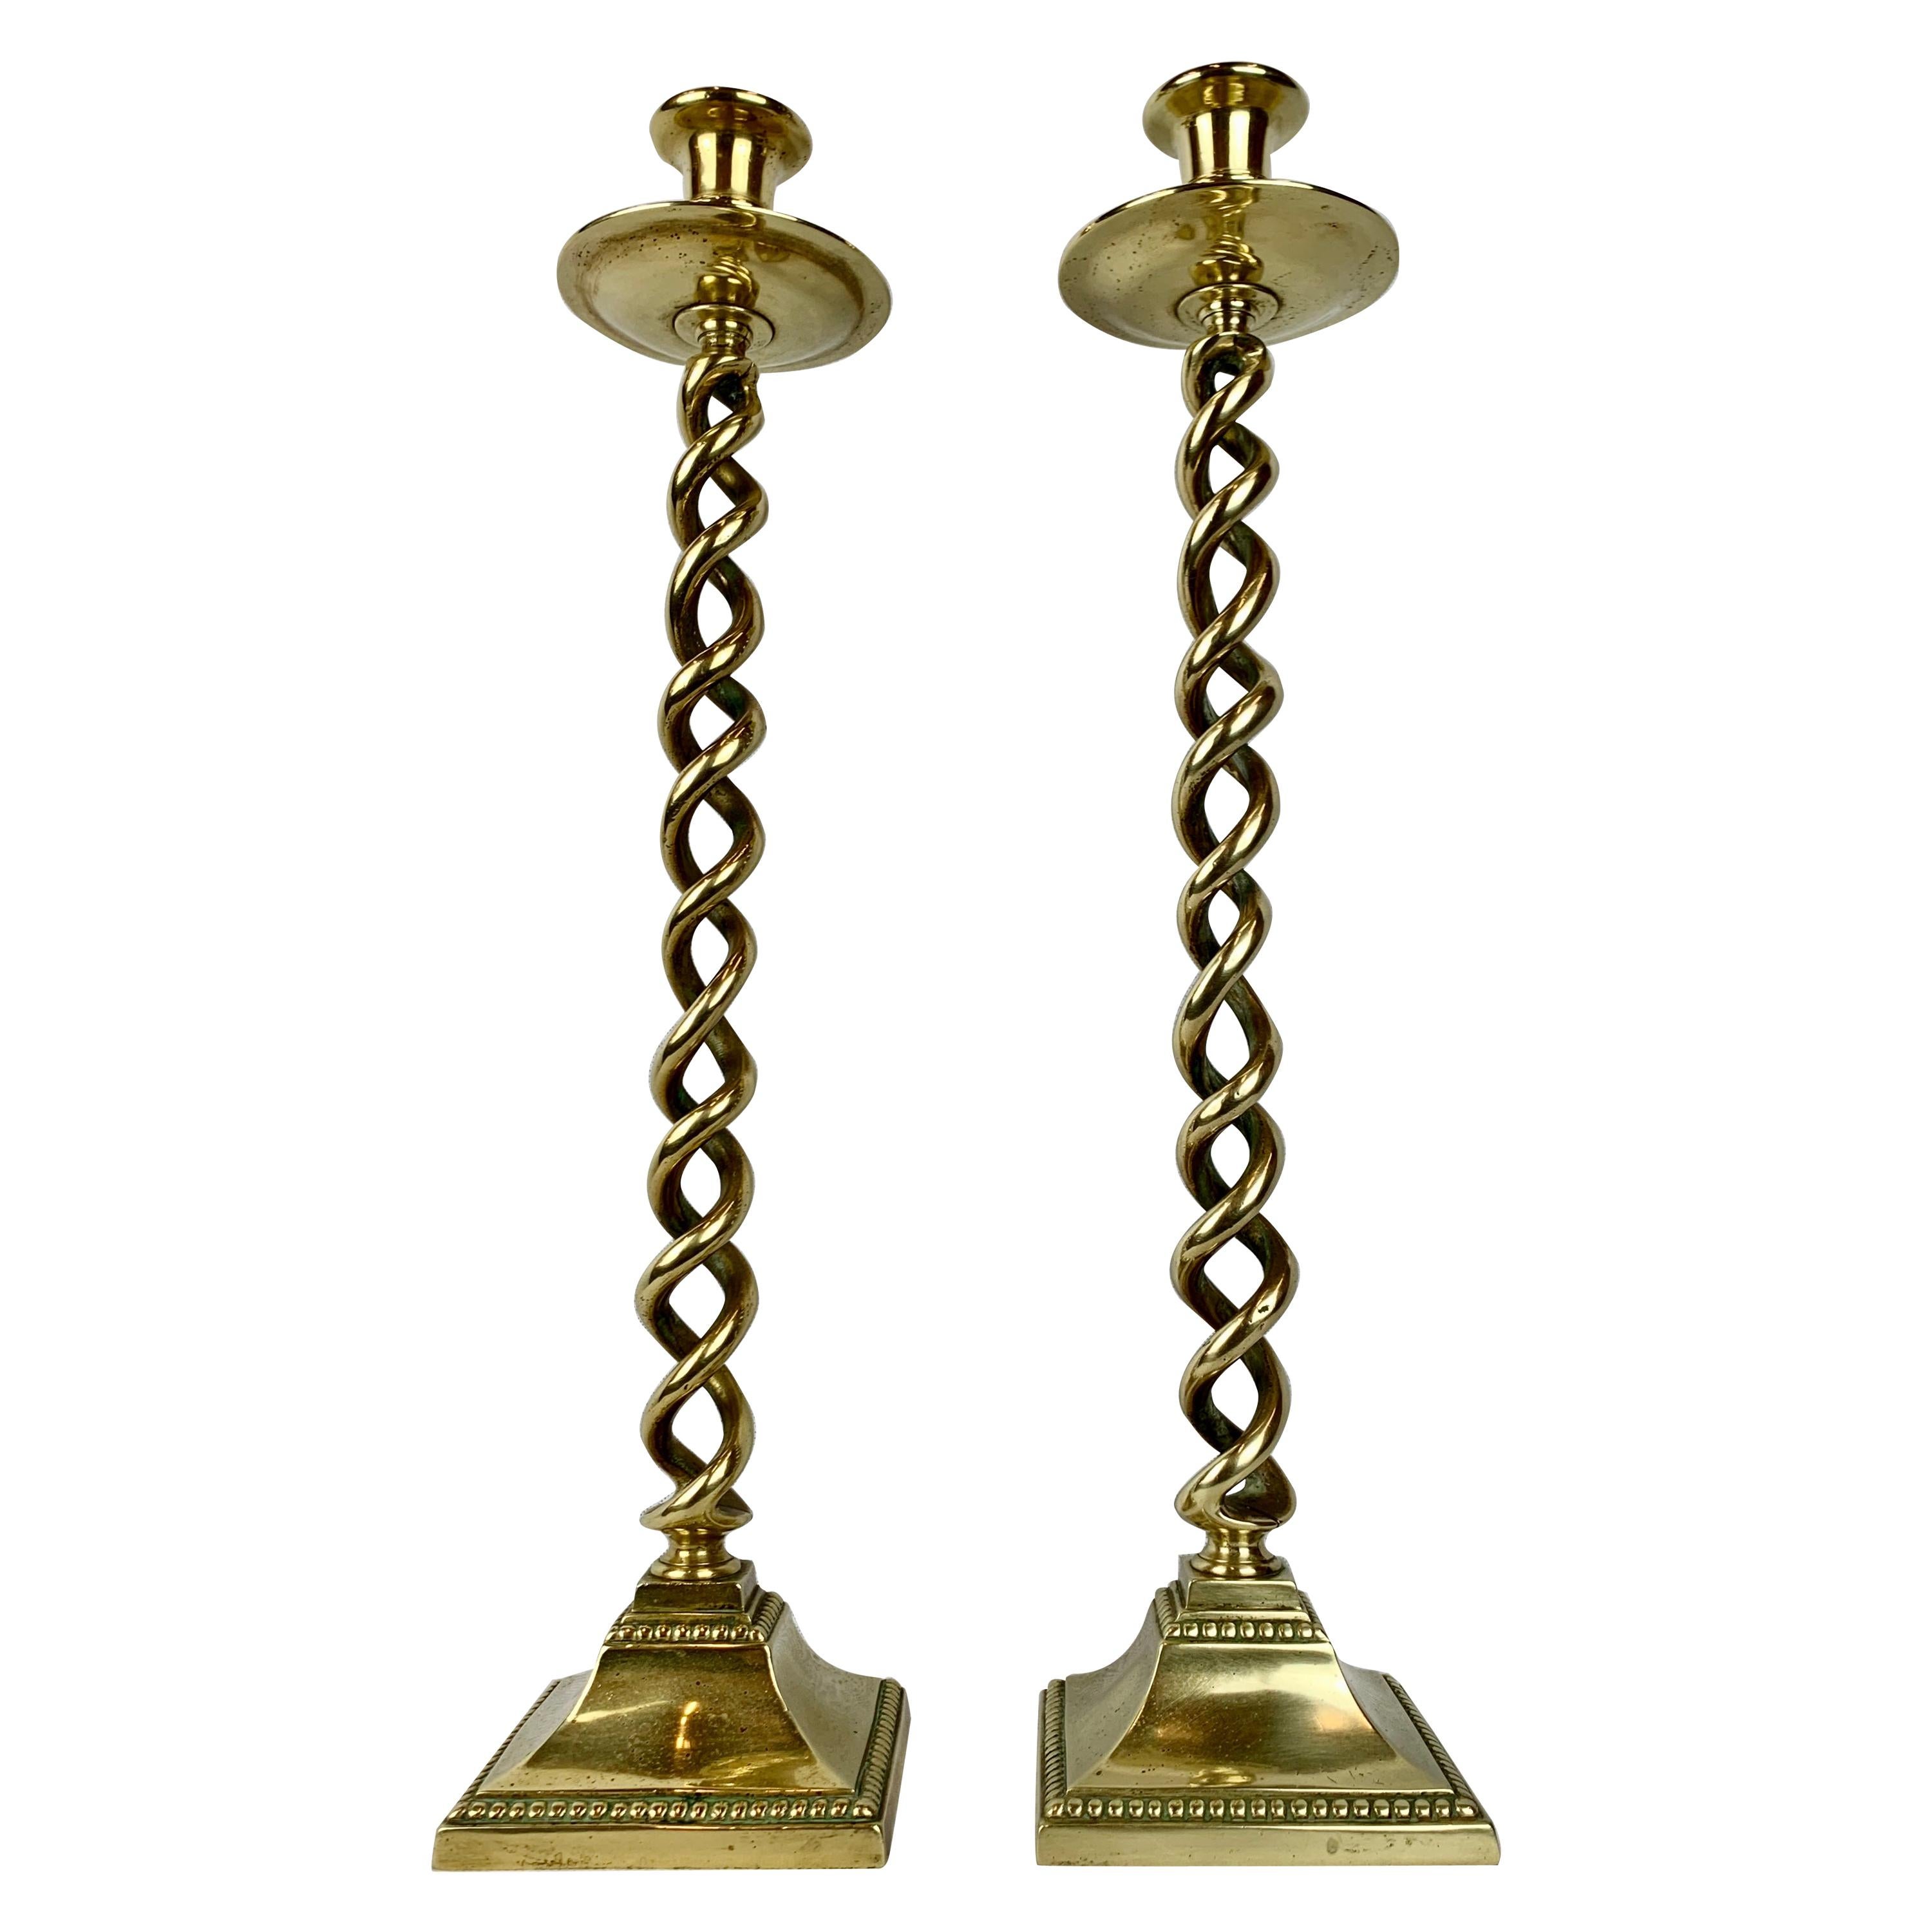 Solid Brass 21” Barley Twist Candlesticks with Square Bases, England, 19th c.